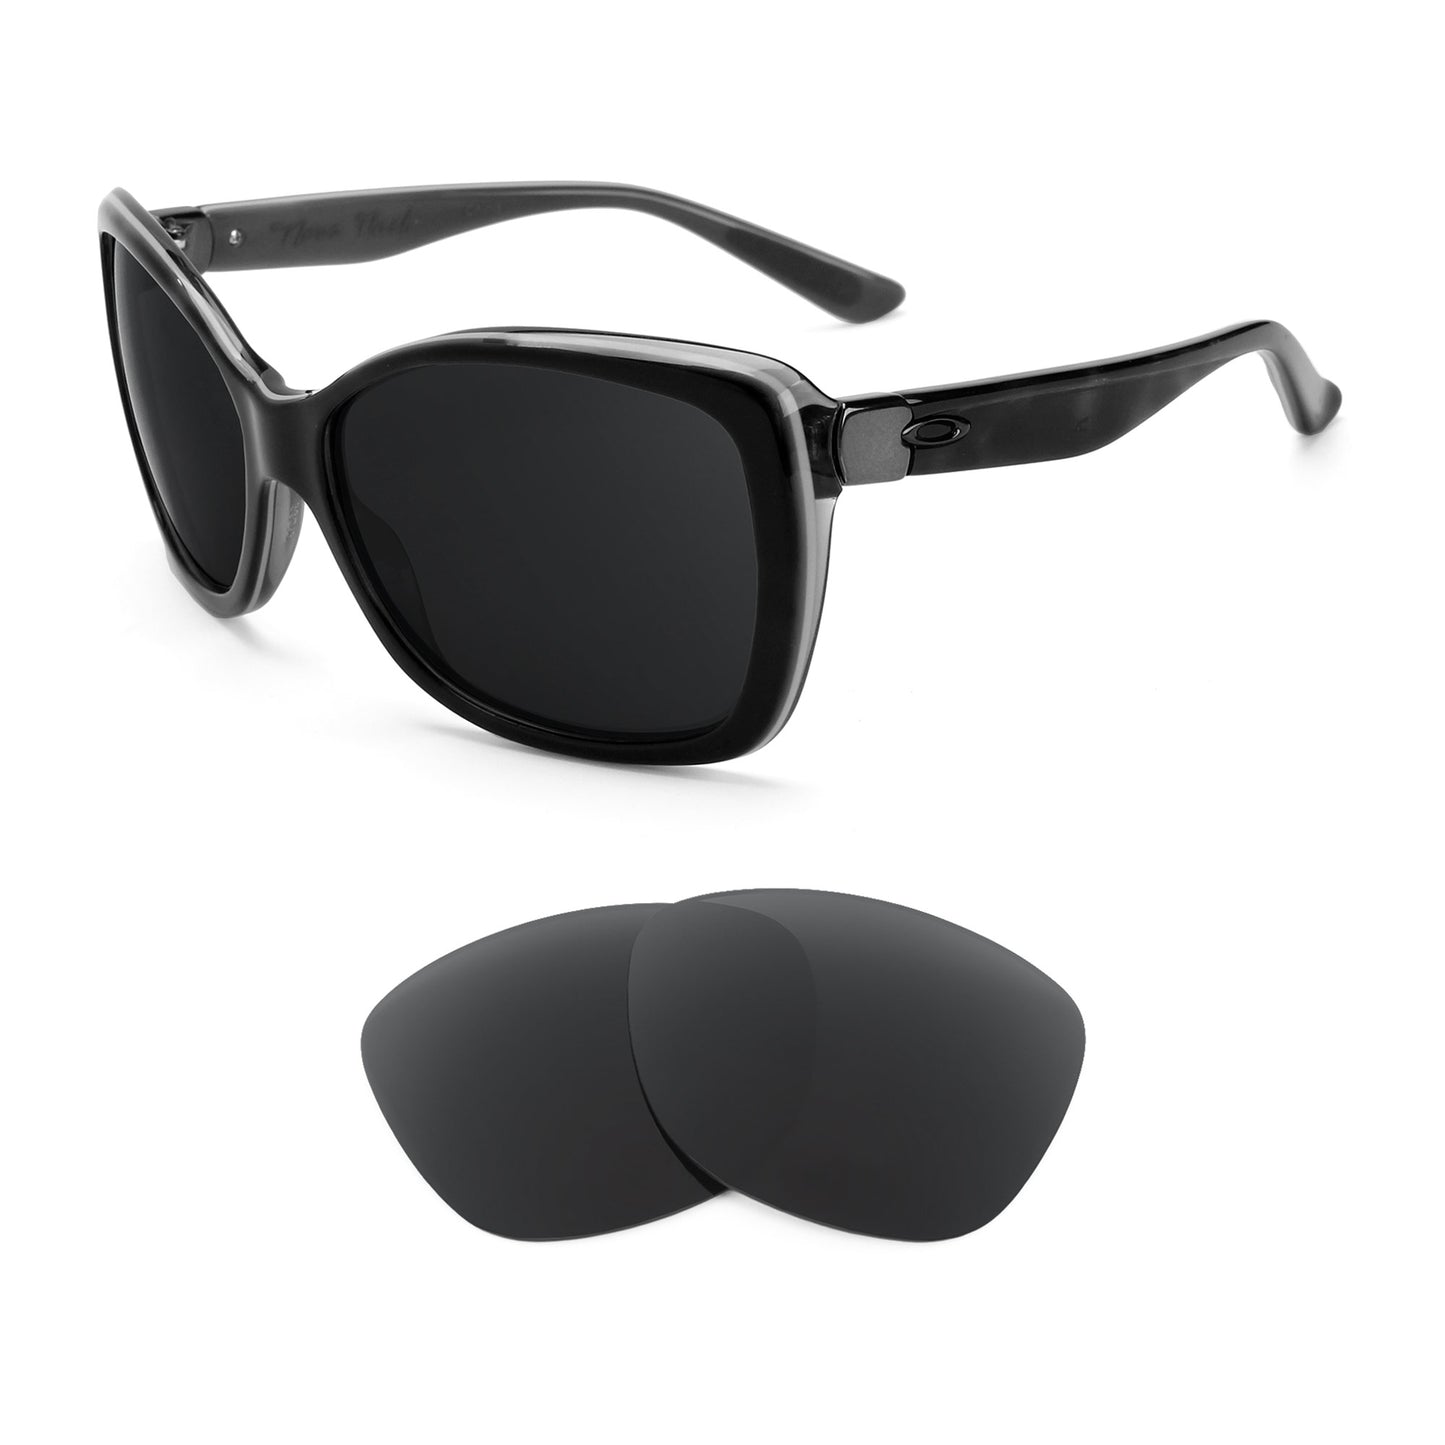 Oakley News Flash sunglasses with replacement lenses